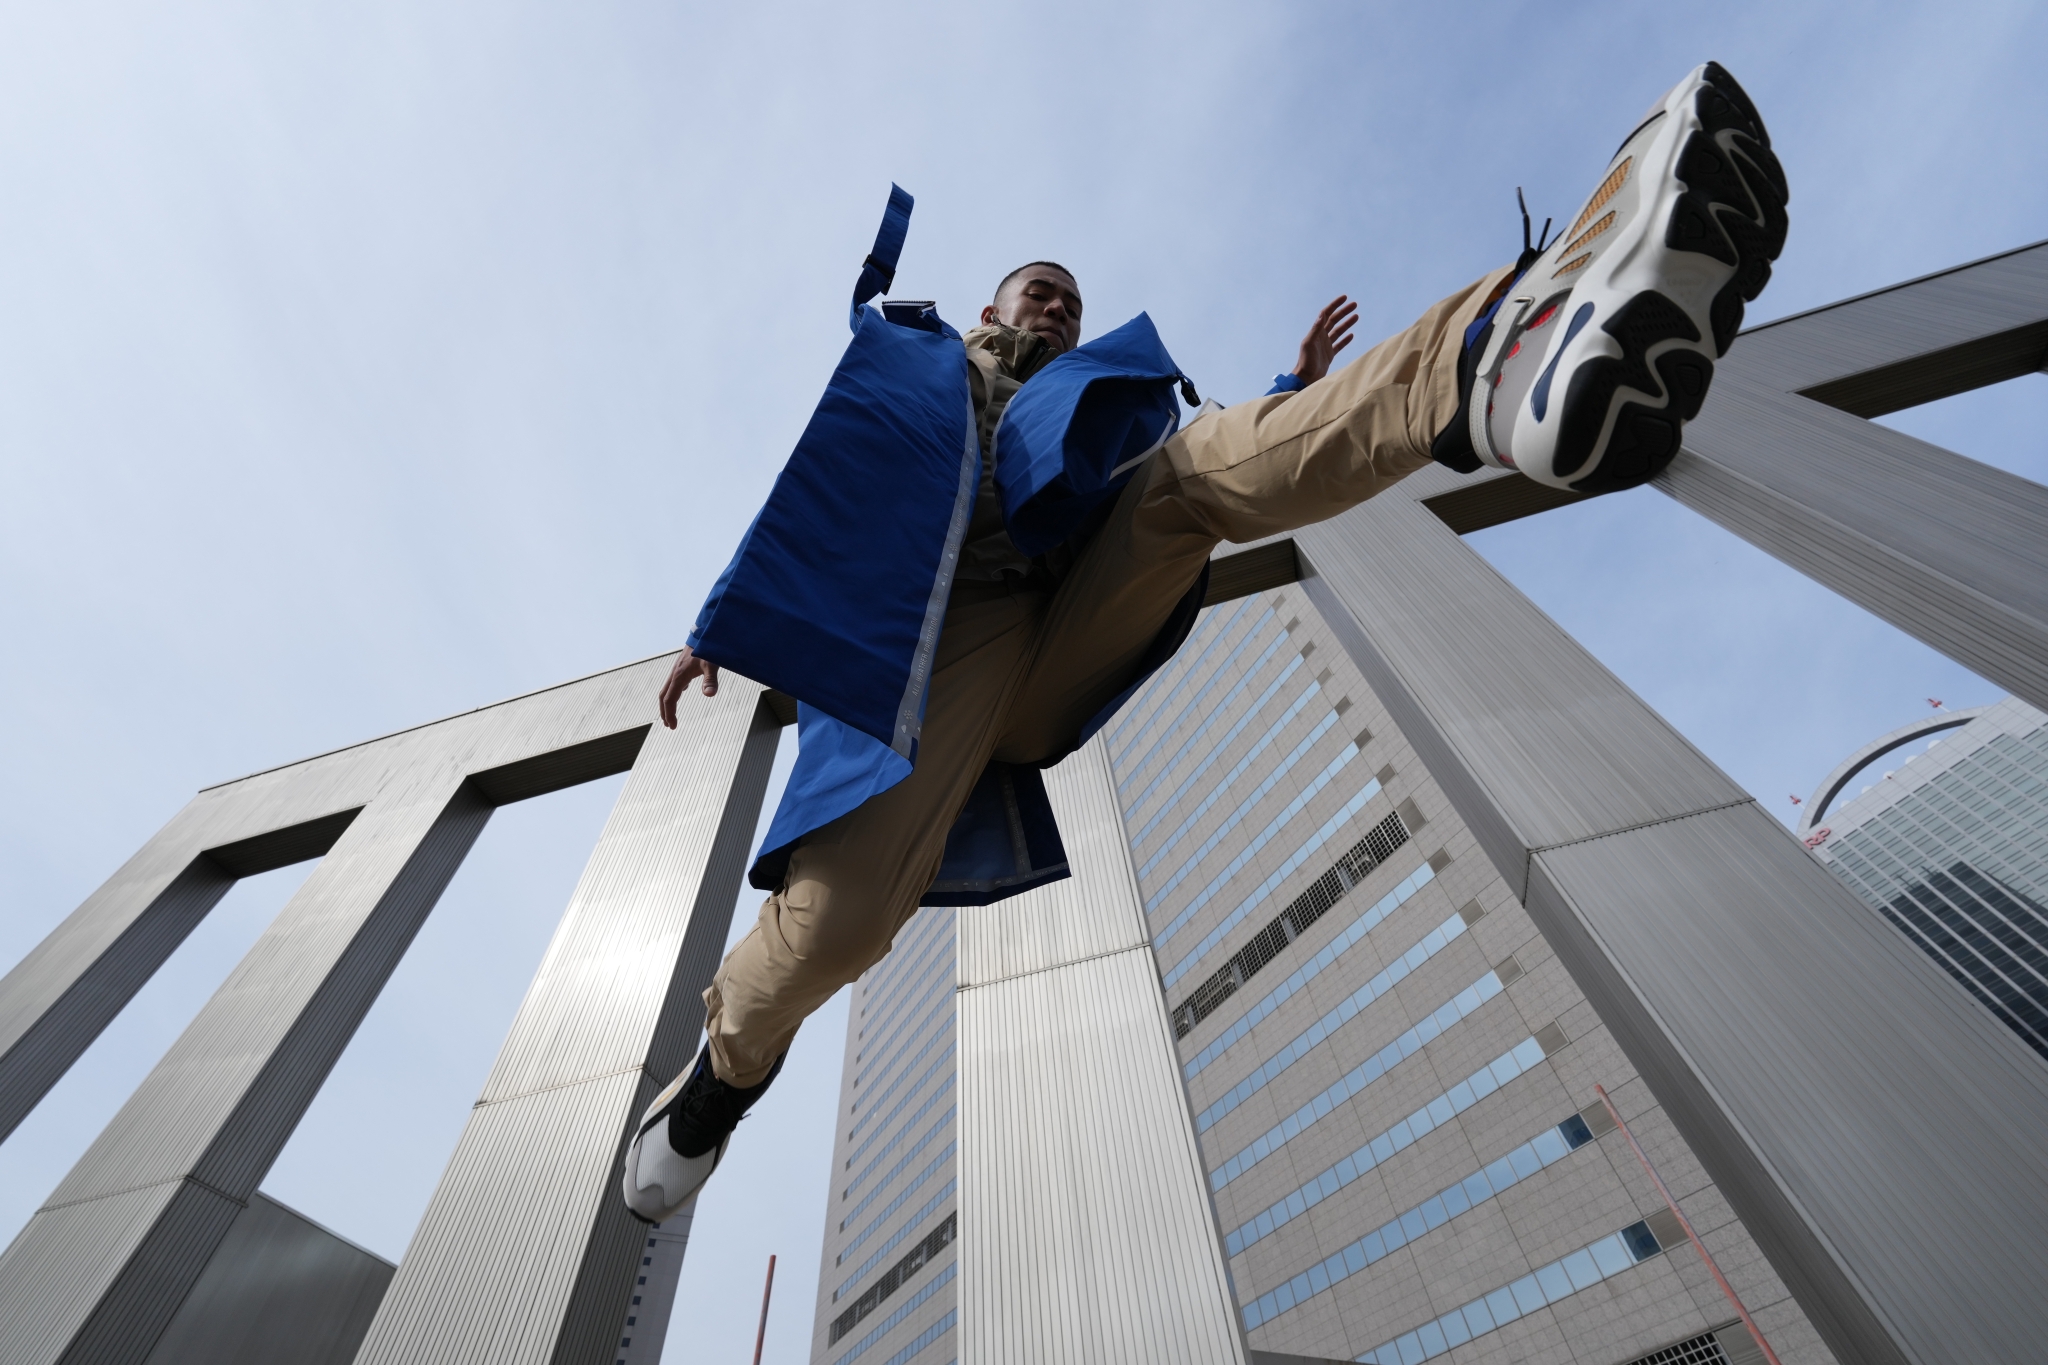 Upward shot of a person in mid-leap in front of a building